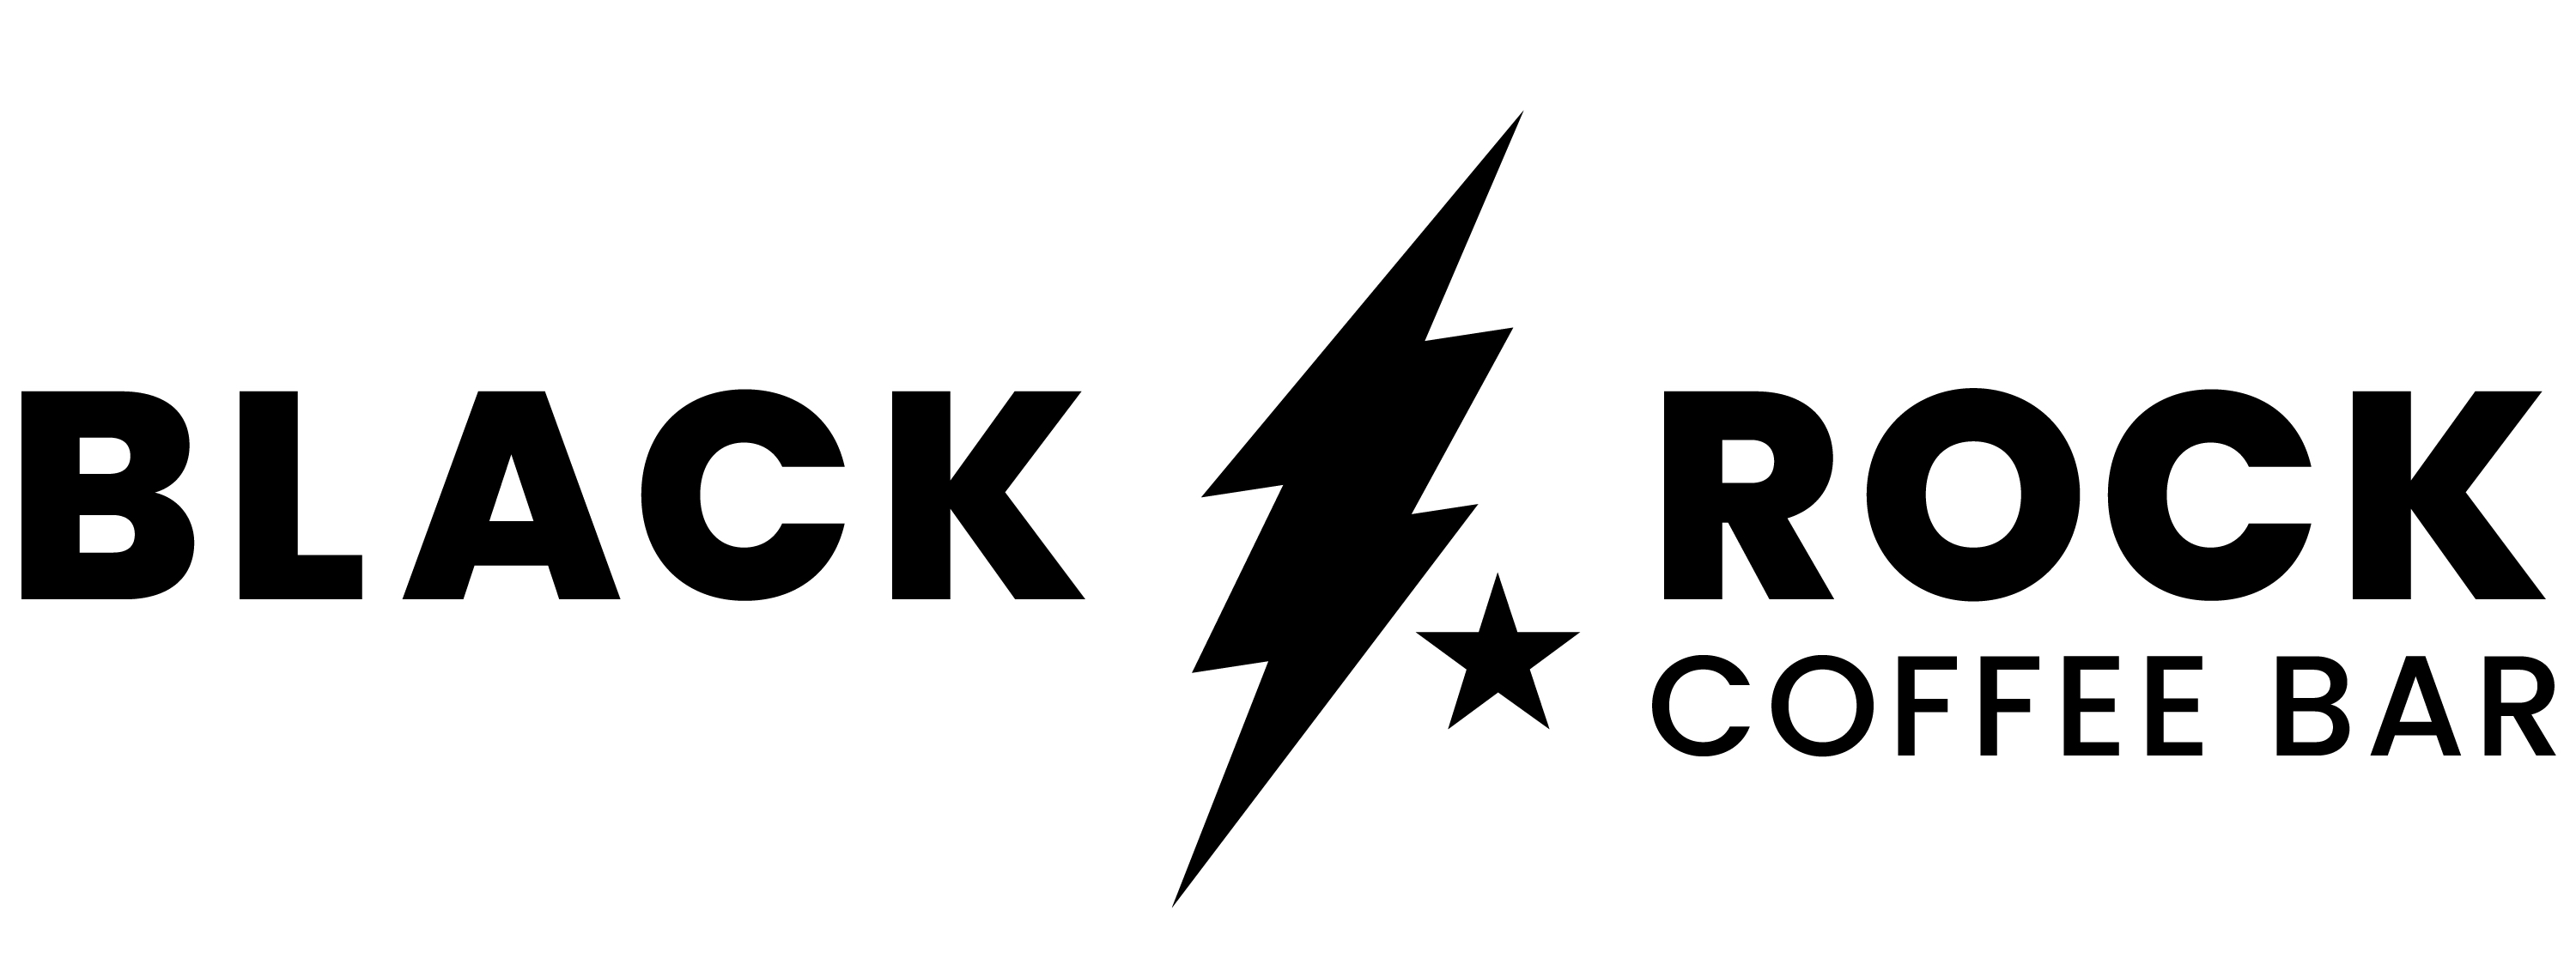 Black Rock Coffee Bar to Open its First Store in Goodyear, Arizona